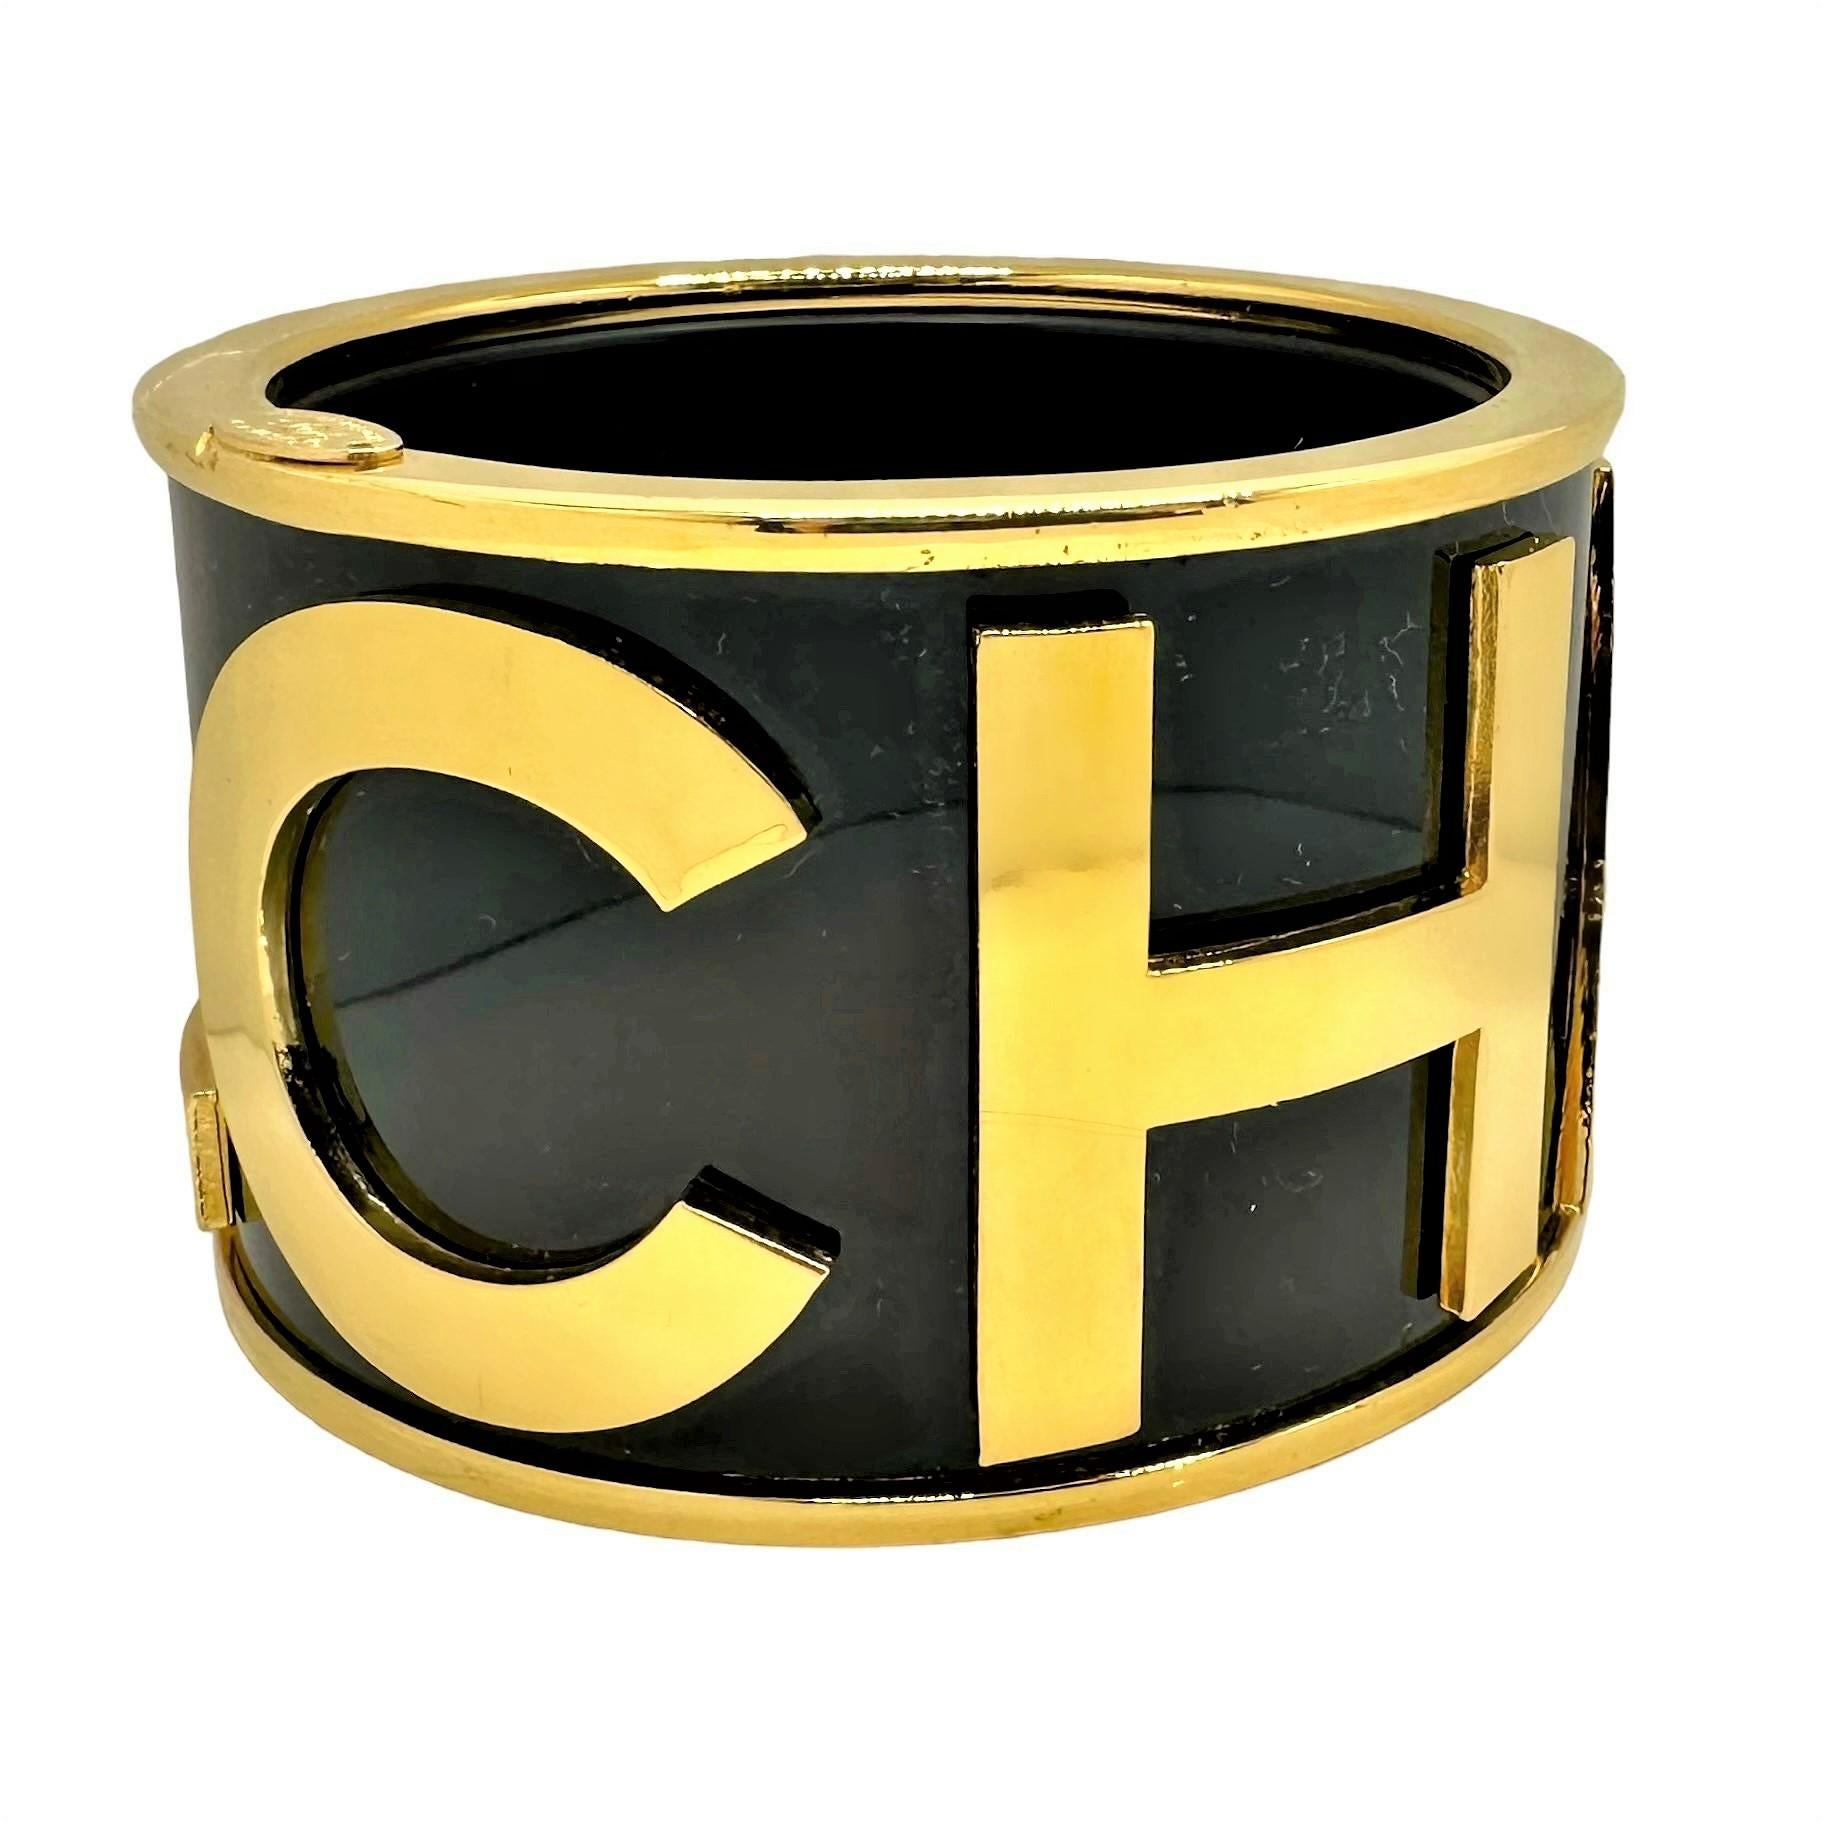 Made for Chanel Runway Season 23, this large size cuff/bangle is one of the most sought after iconic Chanel bracelets. The black background is accented with 1 1/2 inch high gold tone letters spelling out the word CHANEL. The top and bottom edges are